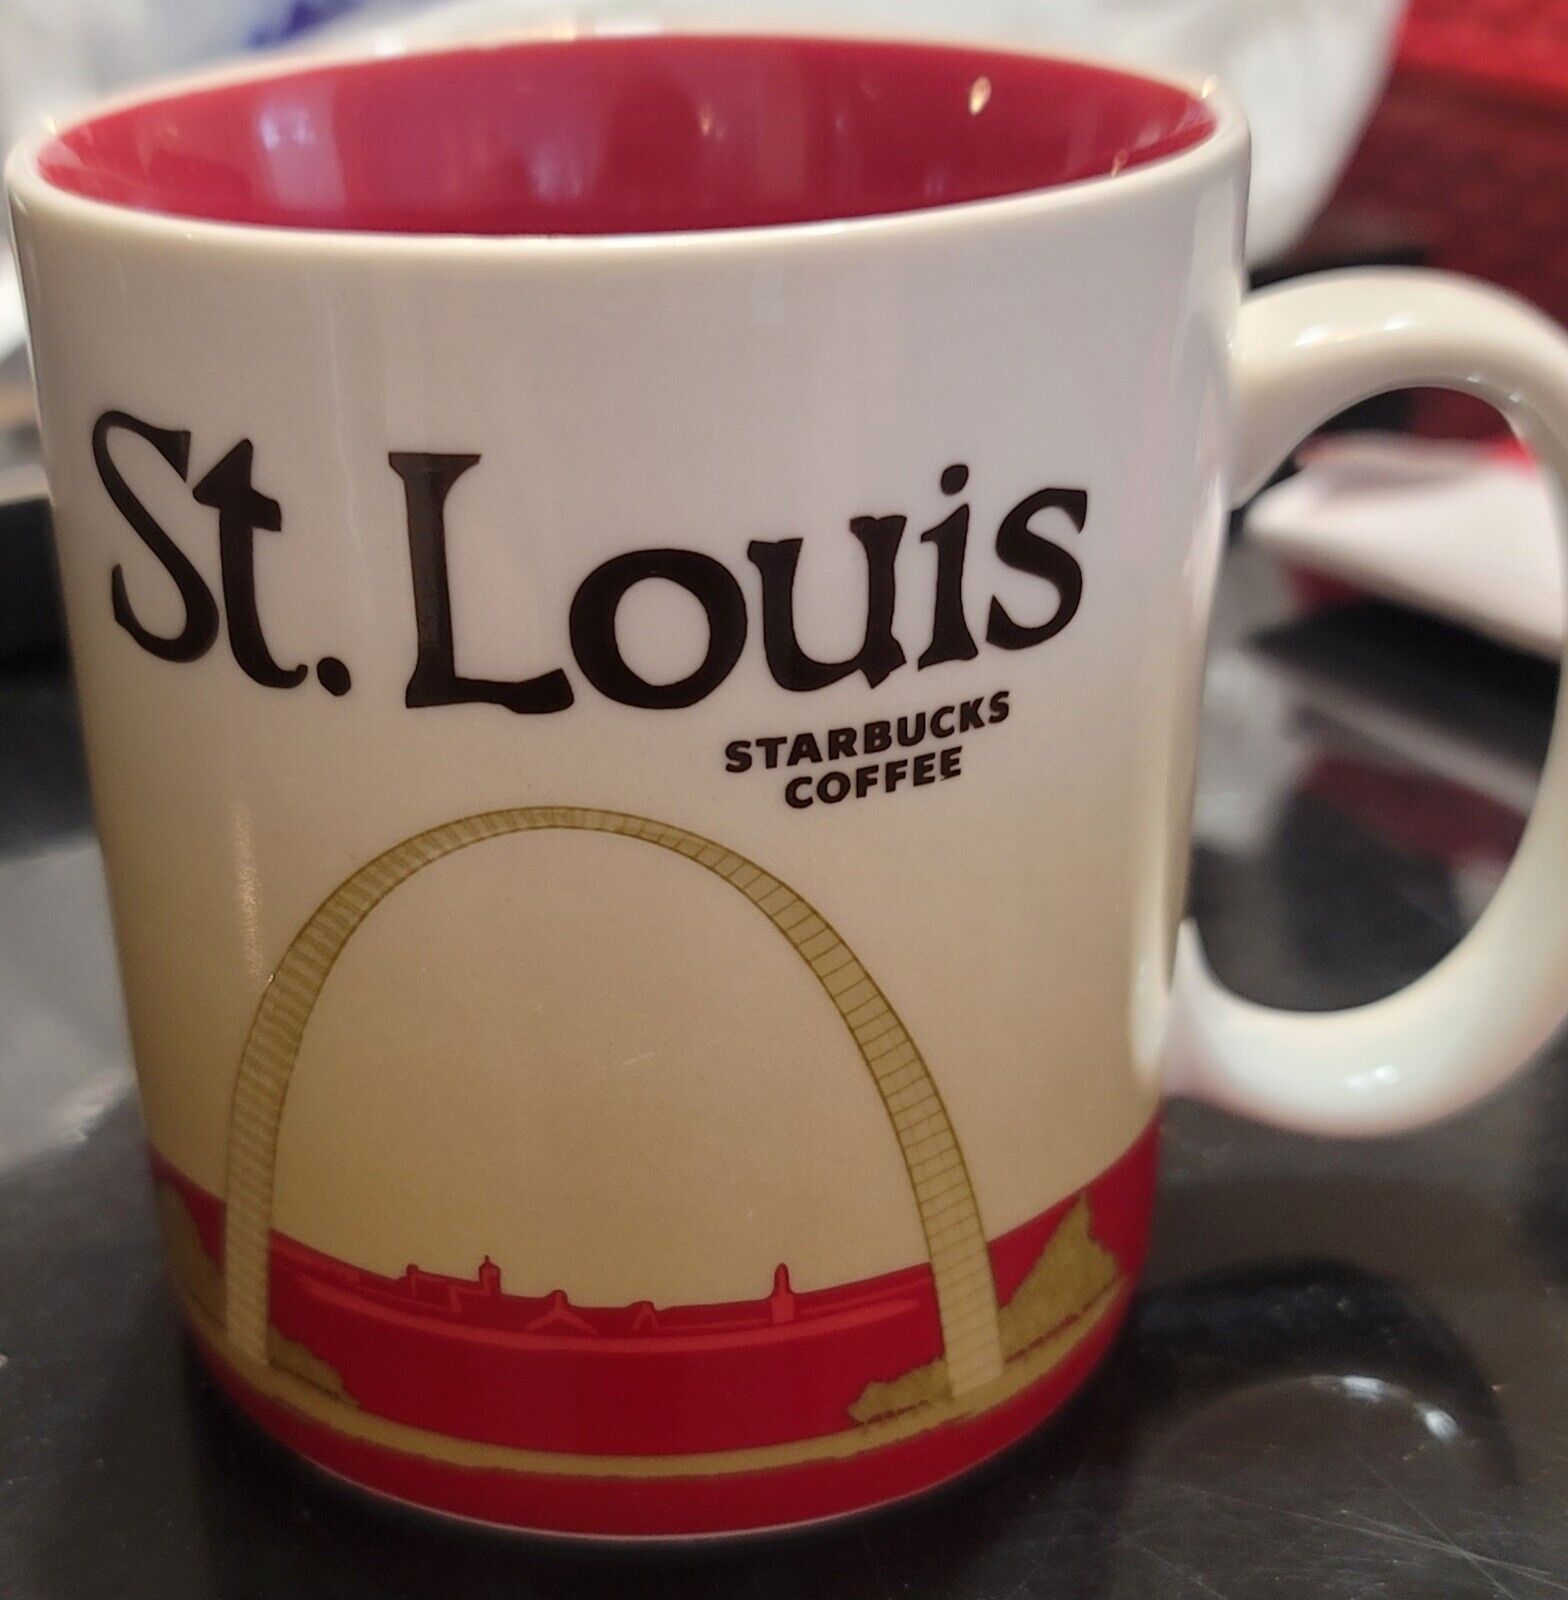 Starbucks St Louis 2012 Global Icon Collector Cup Mug Missouri The Gateway Arch